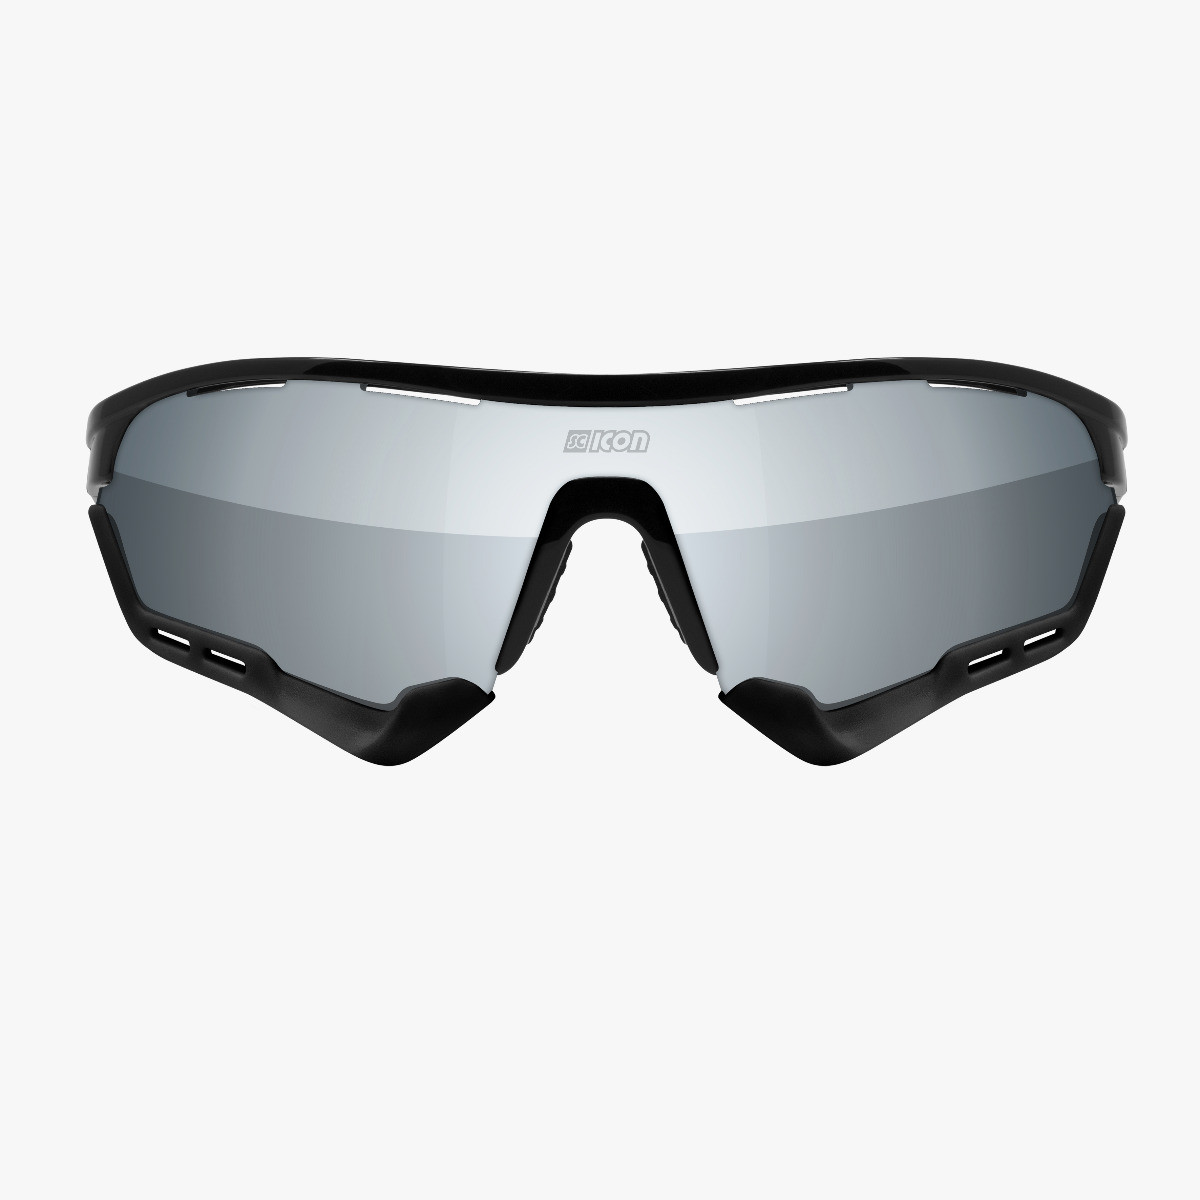 Scicon Sports | Aerotech Sport Cycling Performance Sunglasses - Black / Silver - EY13080205
